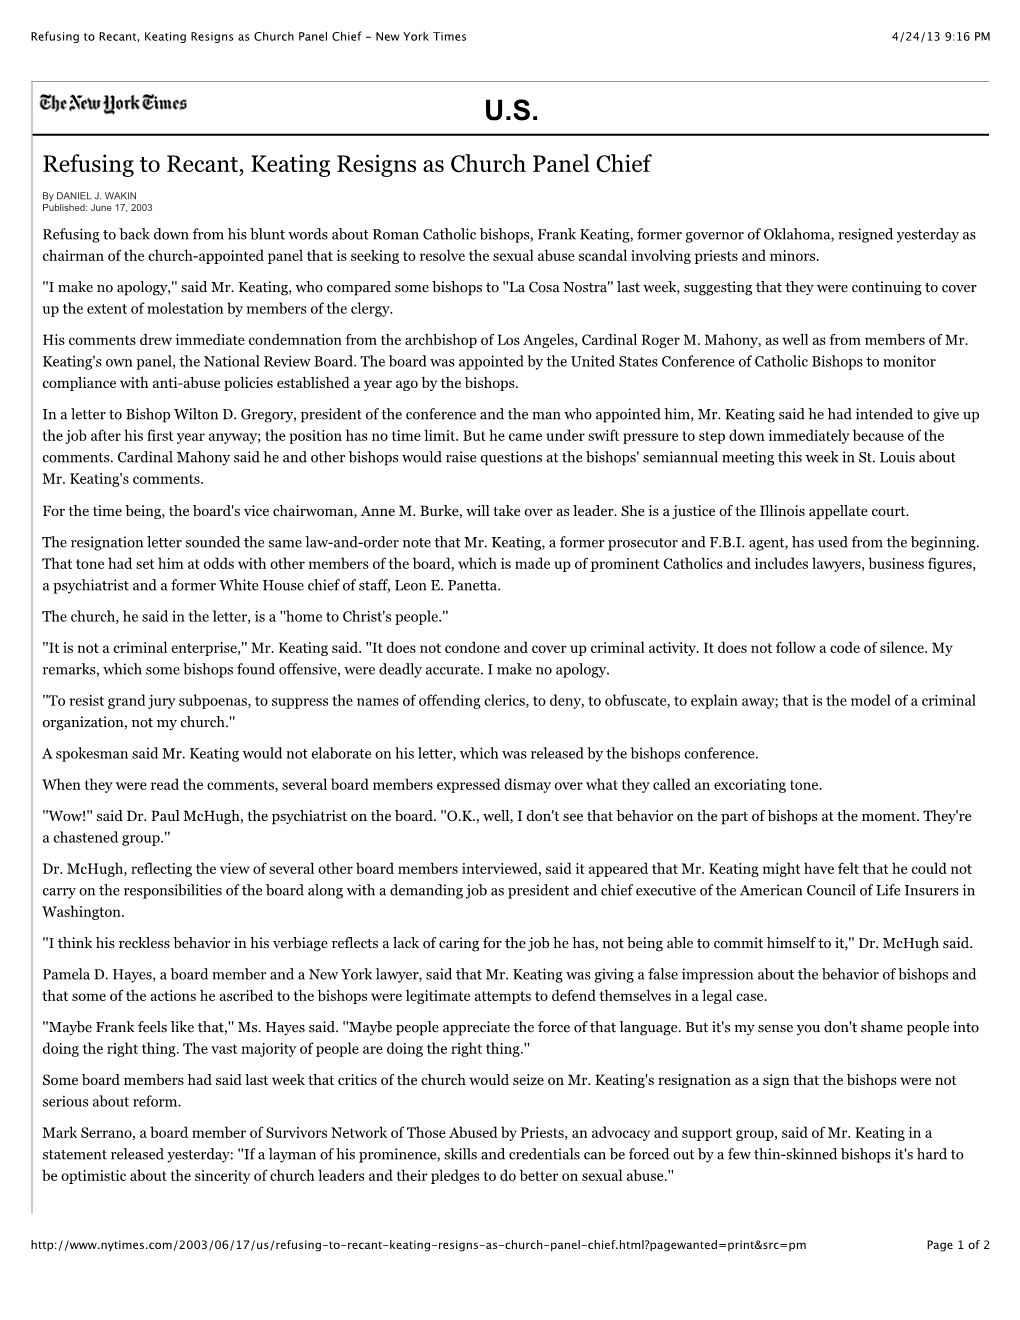 Refusing to Recant, Keating Resigns As Church Panel Chief - New York Times 4/24/13 9:16 PM